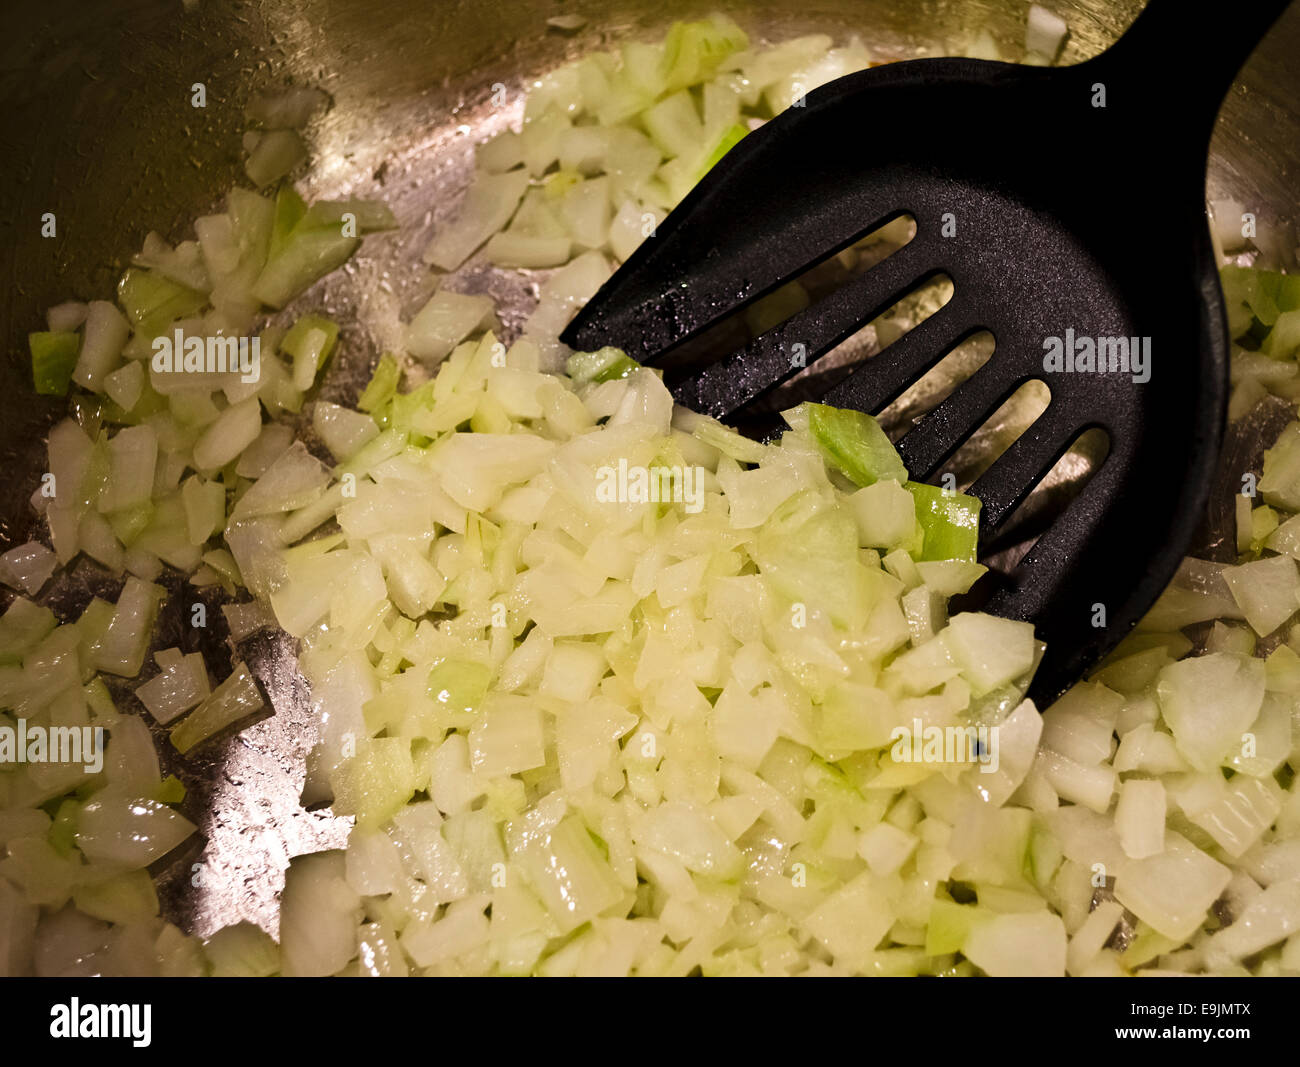 Sautéing onions in a pan.  Cooking onions in a pot with a spatula. Sauté onions on the stove. Stock Photo